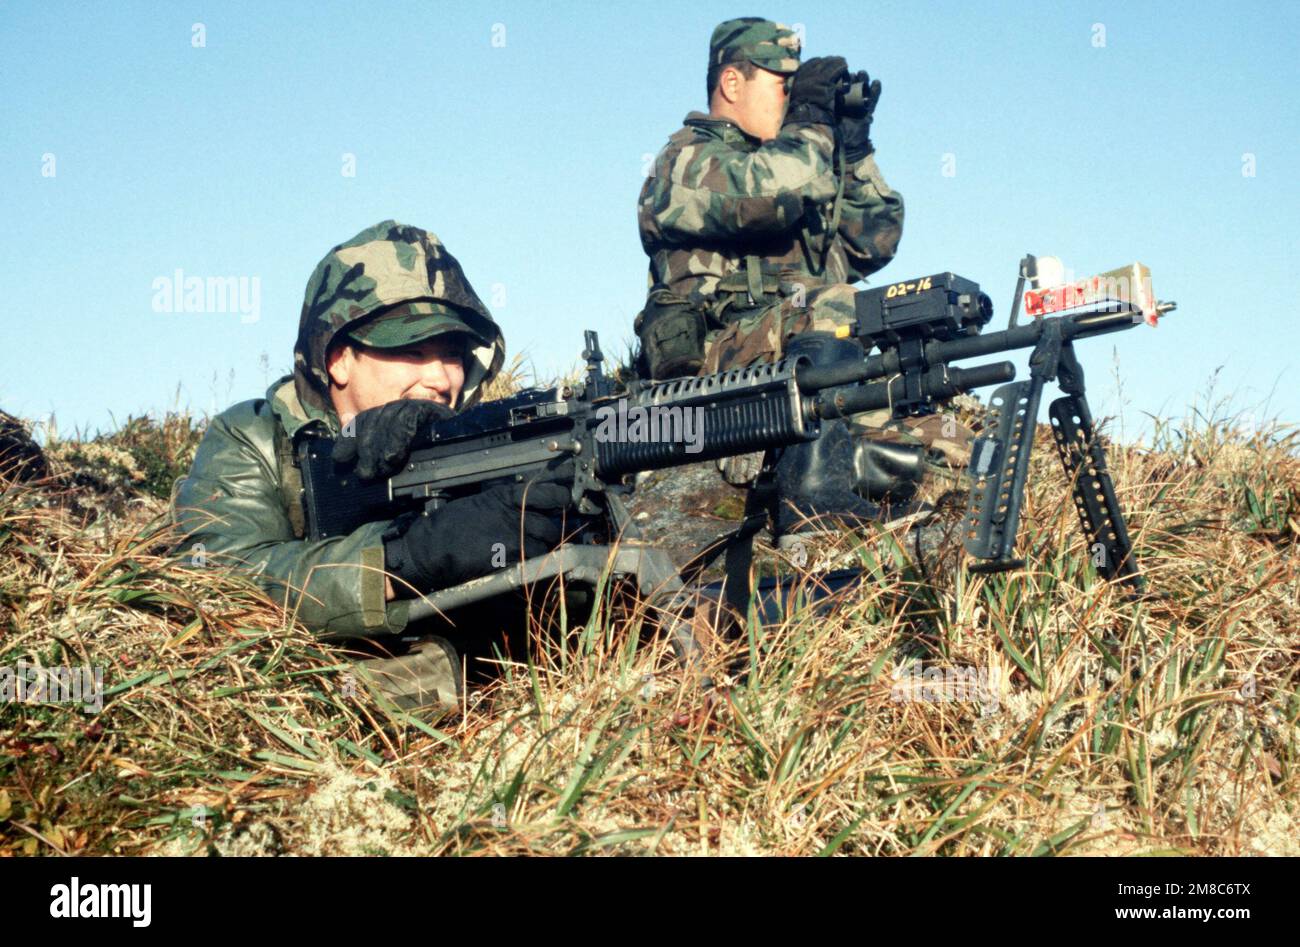 A machine gun team from Co. C, 2nd Bn., 297th Infantry Group (Scout), Alaska National Guard, waits for the approach of aggressor forces during exercise Kernal Potlatch '89. The soldier's M-60 machine gun is equipped with multiple integrated laser engagement system (MILES) units. Subject Operation/Series: KERNAL POTLATCH '89 Base: Amchitka Island State: Alaska (AK) Country: United States Of America (USA) Stock Photo